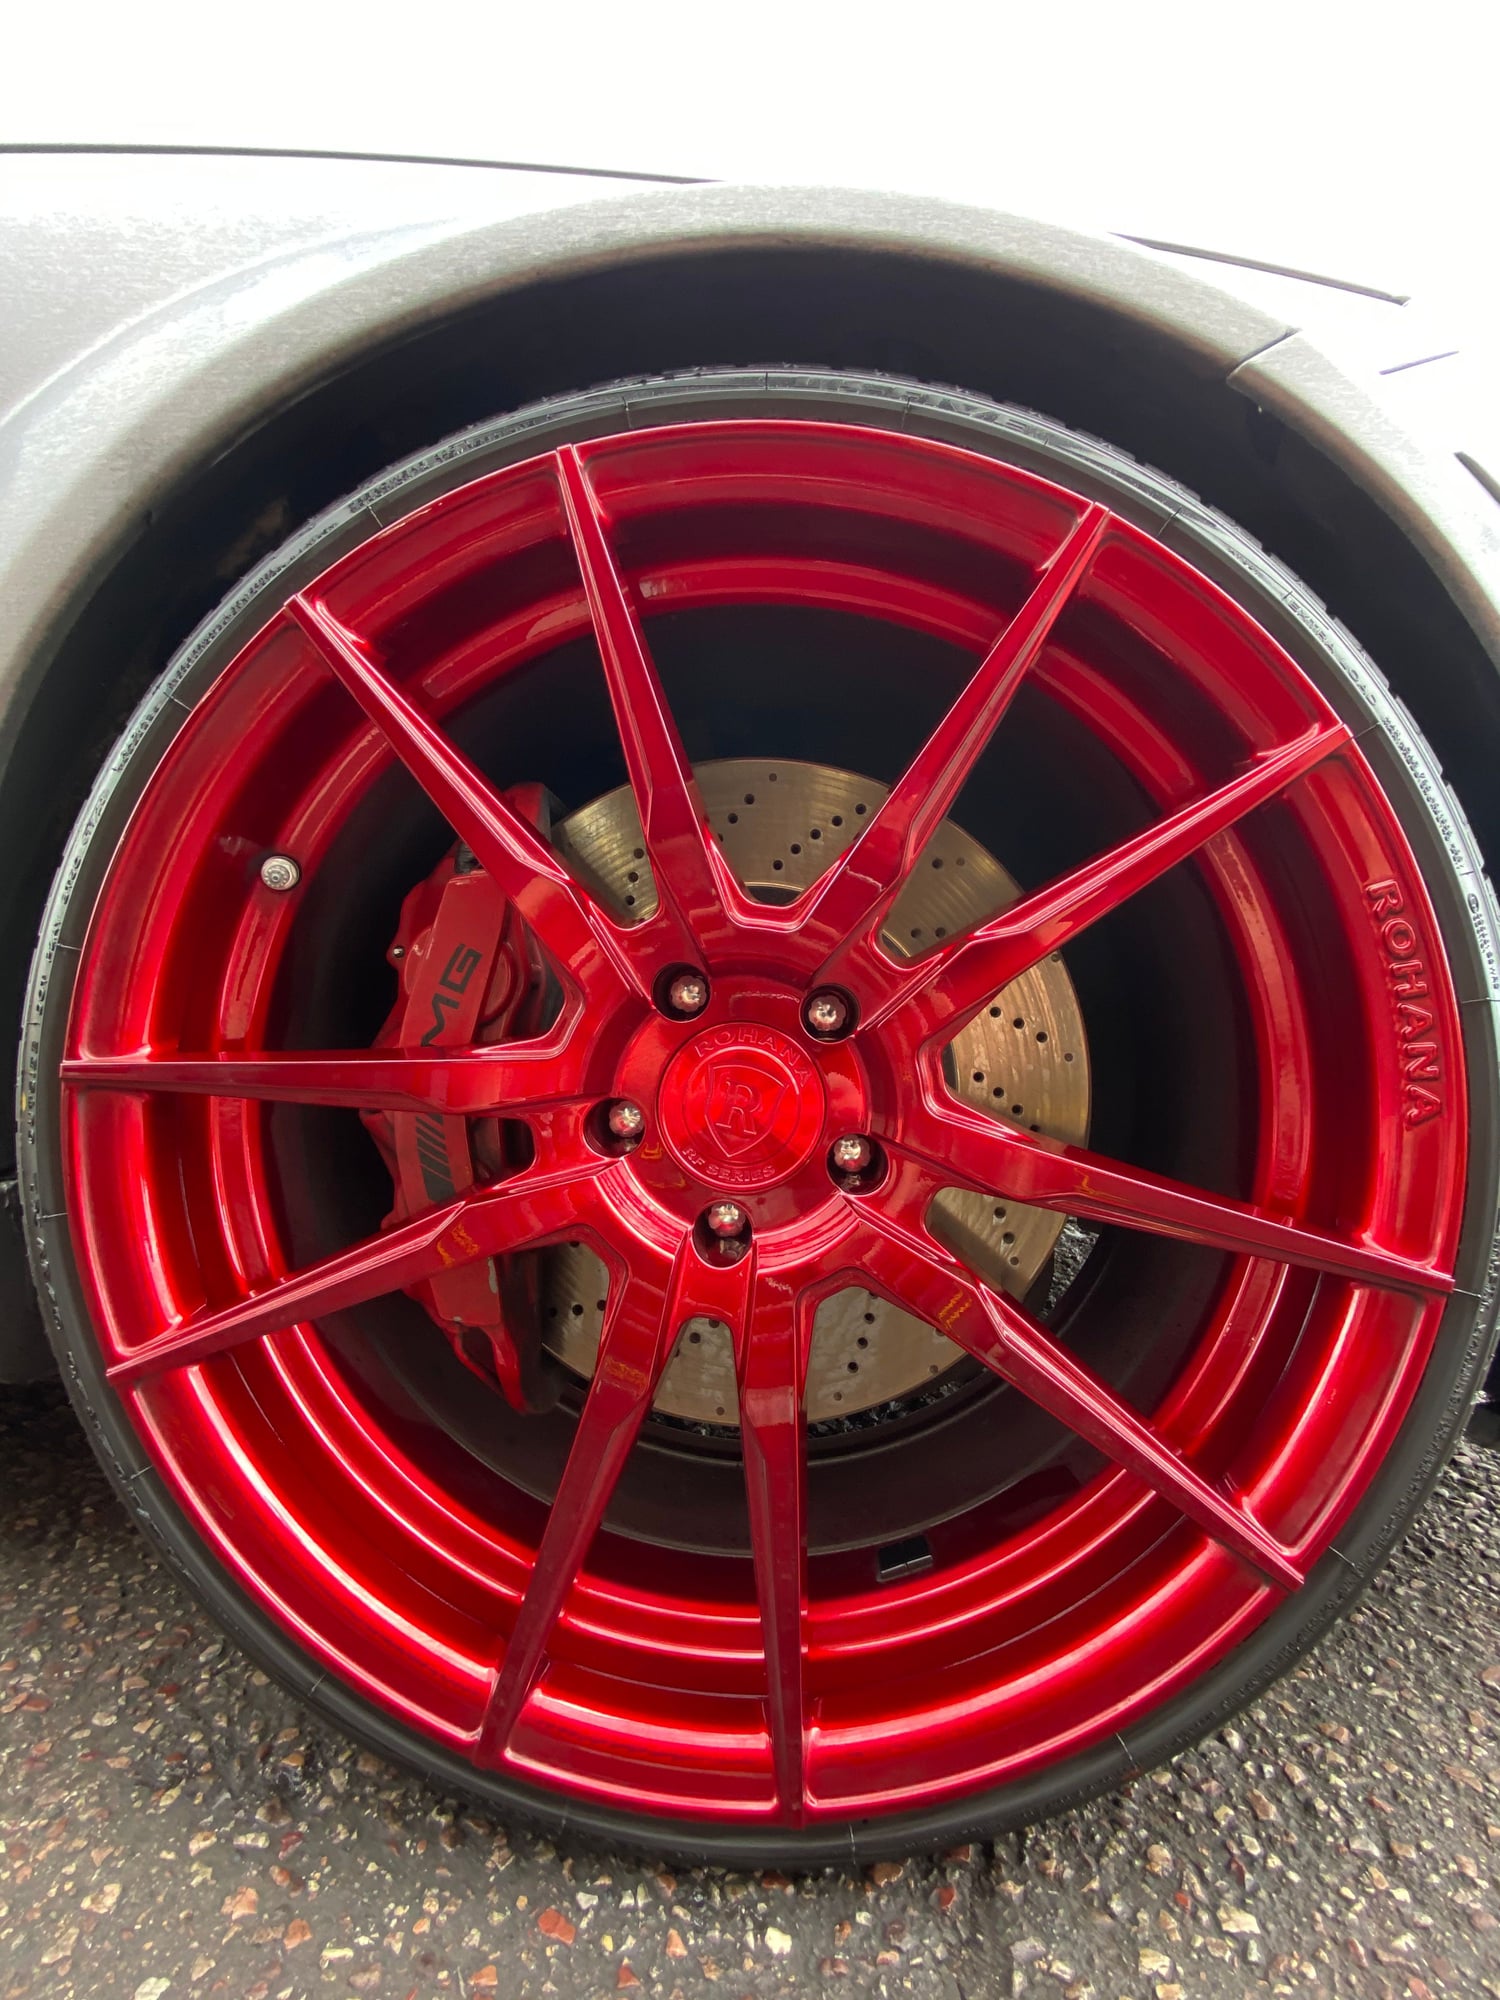 Wheels and Tires/Axles - C63 (w204 ) Gorgeous Rohana Wheels and tires for sale - Used - 2009 to 2015 Mercedes-Benz C63 AMG - Colorado Springs, CO 80904, United States